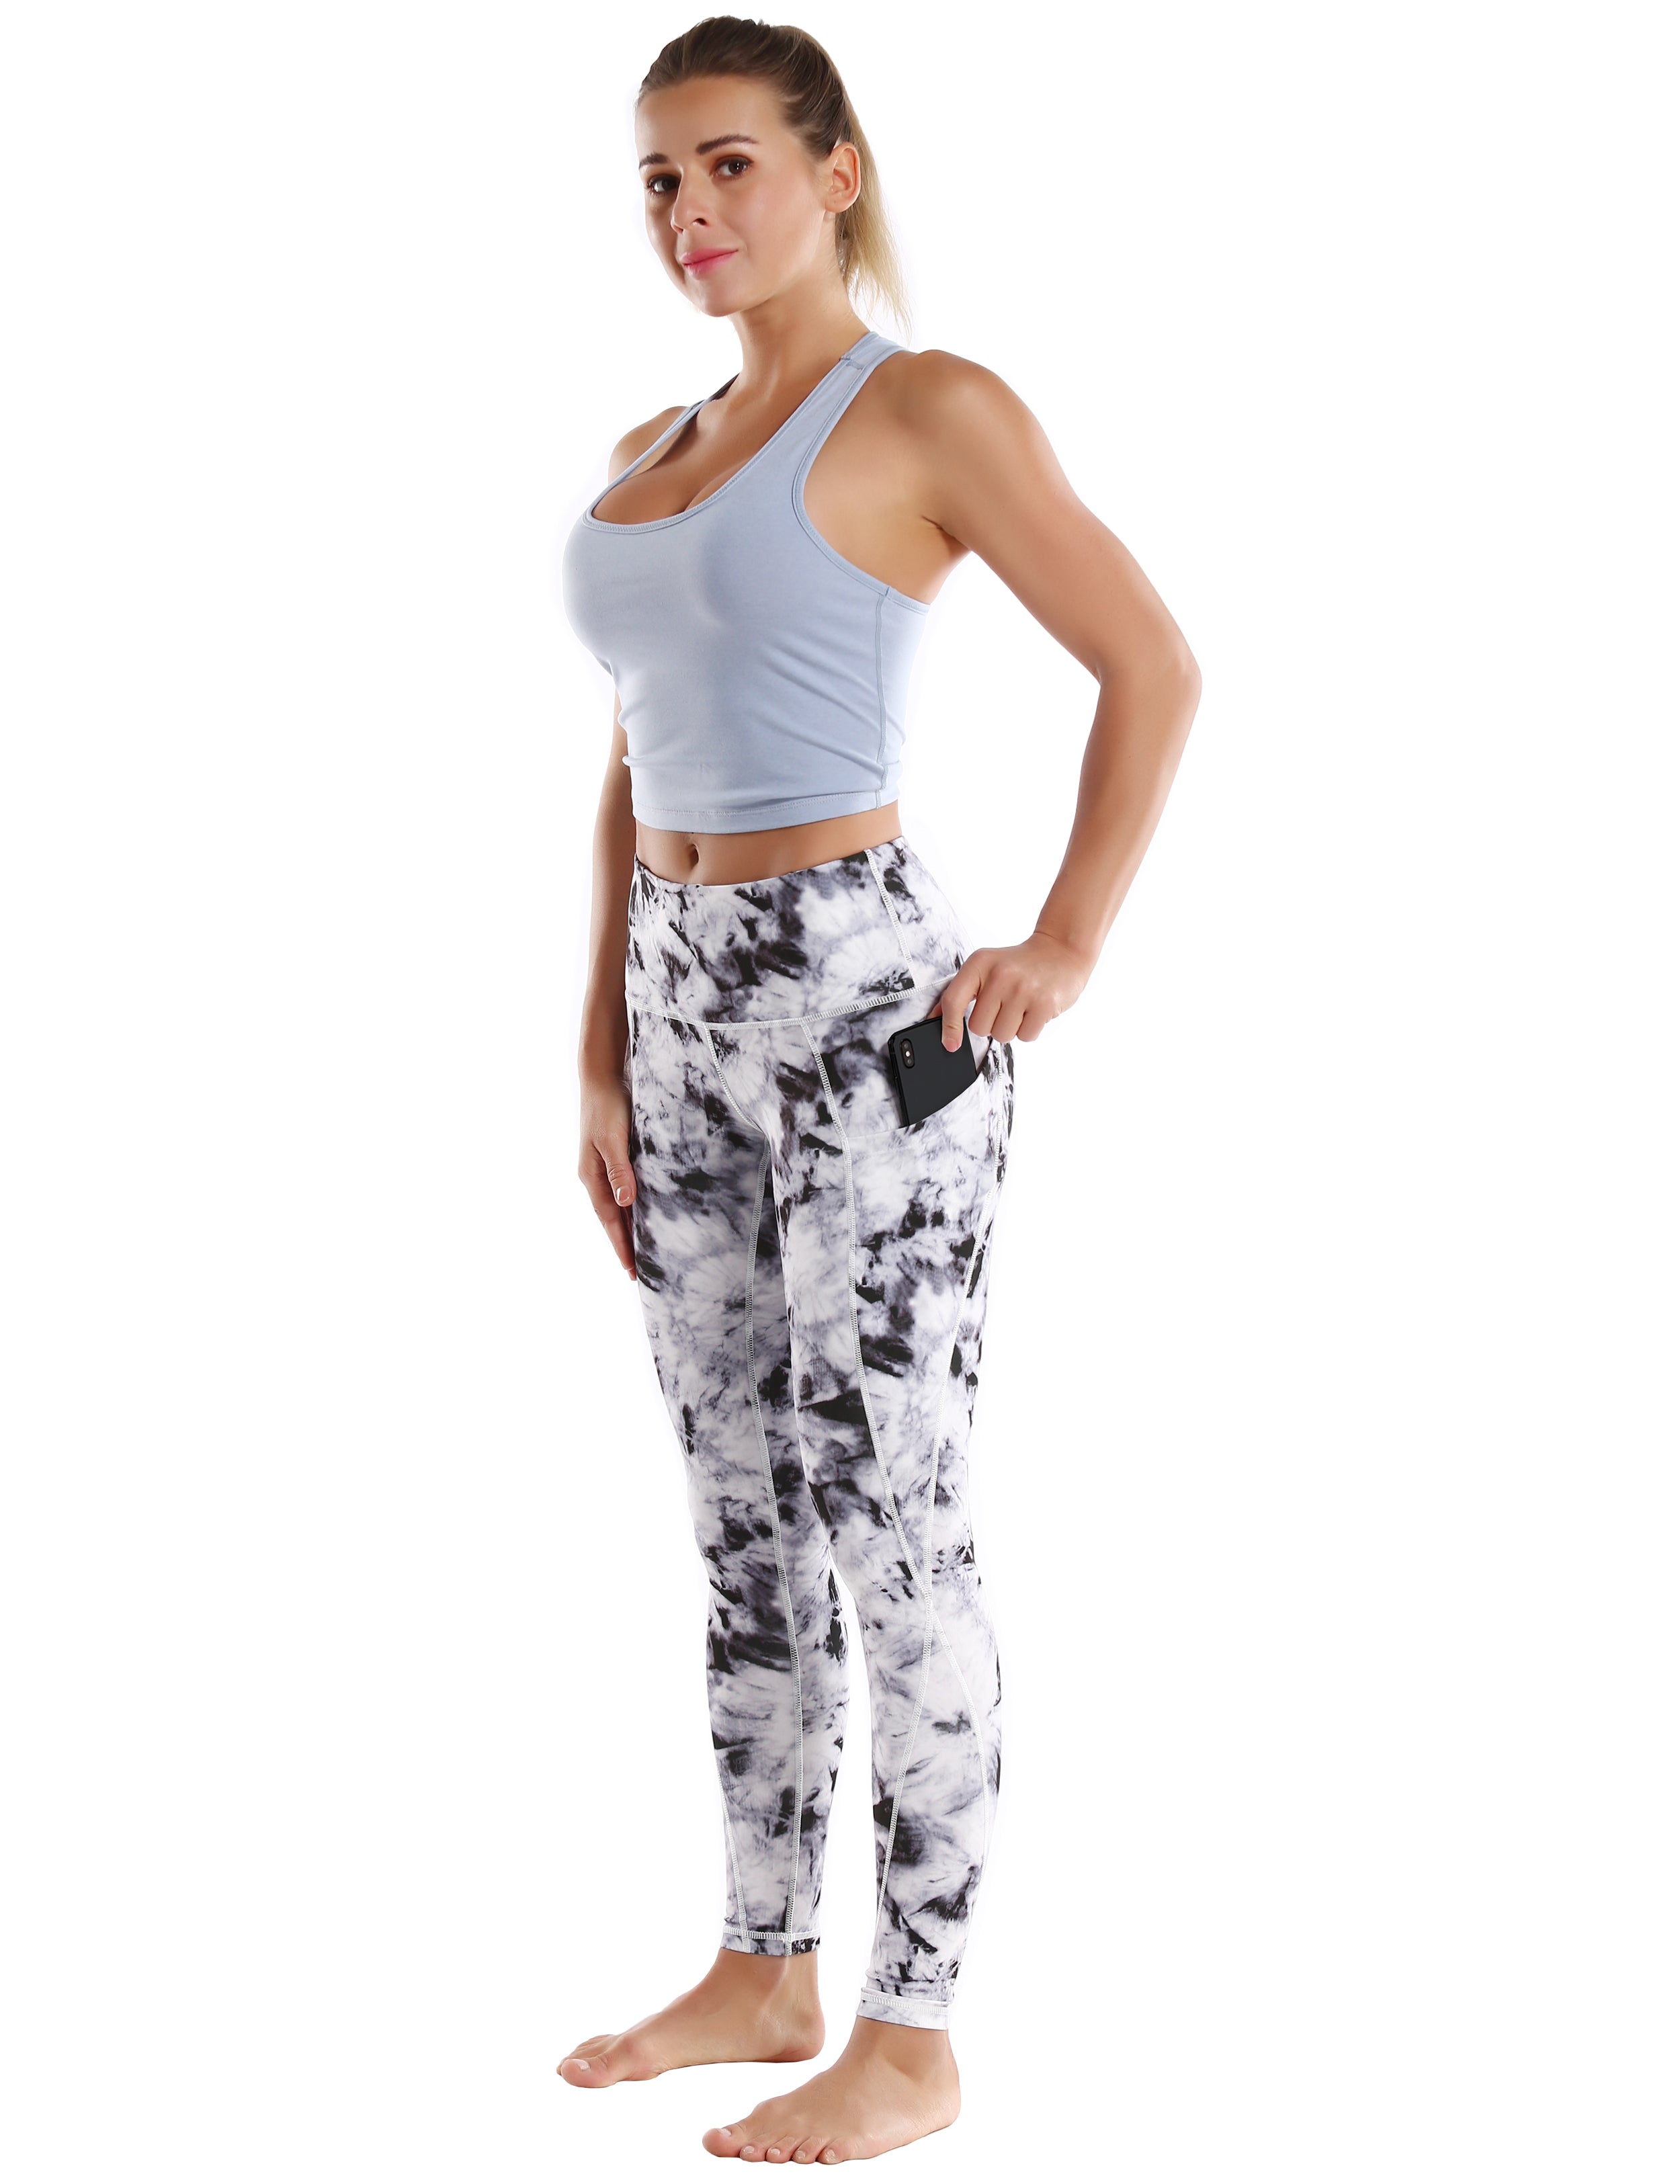 High Waist Side Pockets Tall Size Pants blackdandelion 78%Polyester/22%Spandex Fabric doesn't attract lint easily 4-way stretch No see-through Moisture-wicking Tummy control Inner pocket